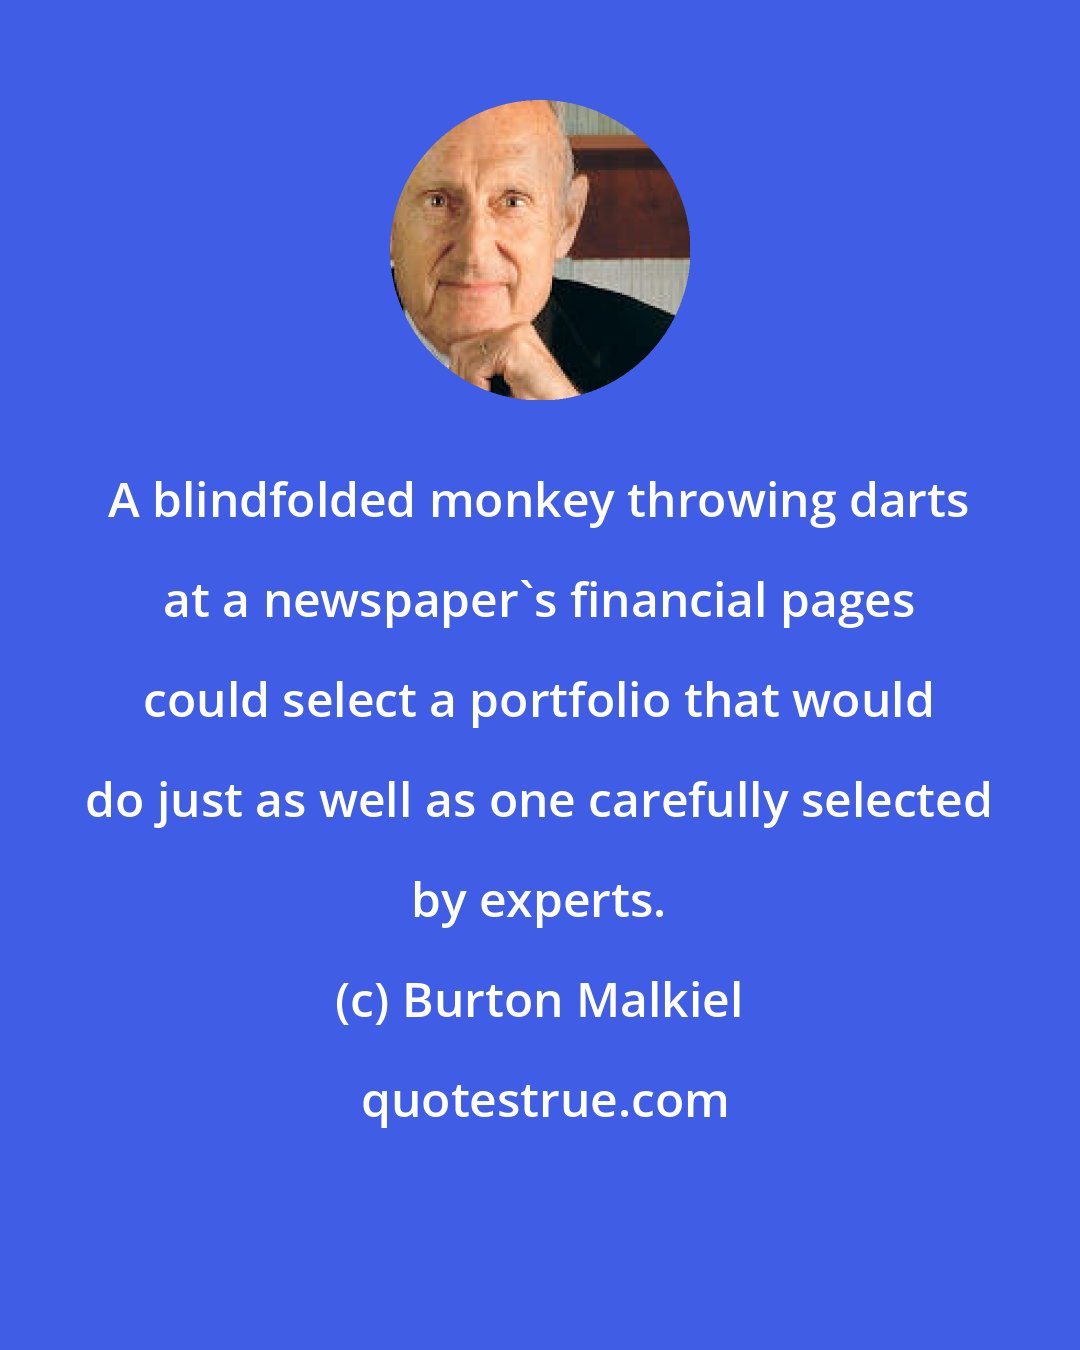 Burton Malkiel: A blindfolded monkey throwing darts at a newspaper's financial pages could select a portfolio that would do just as well as one carefully selected by experts.